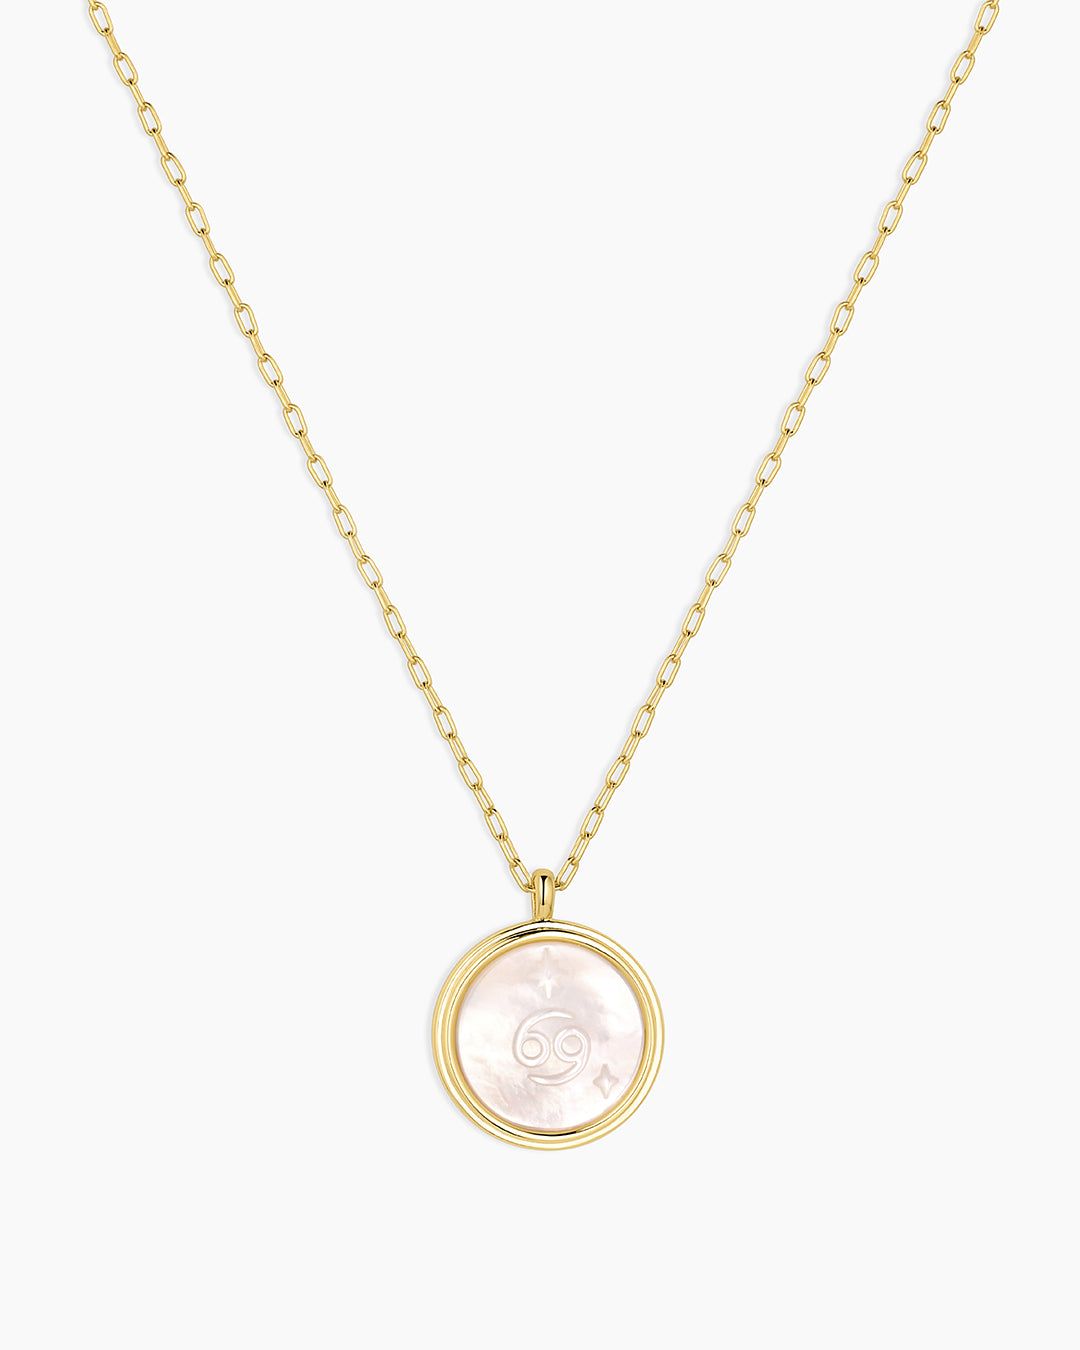 Zodiac Necklace - Scorpio, Astrology Coin Necklace, Scorpio Necklace || option::Gold Plated, Cancer